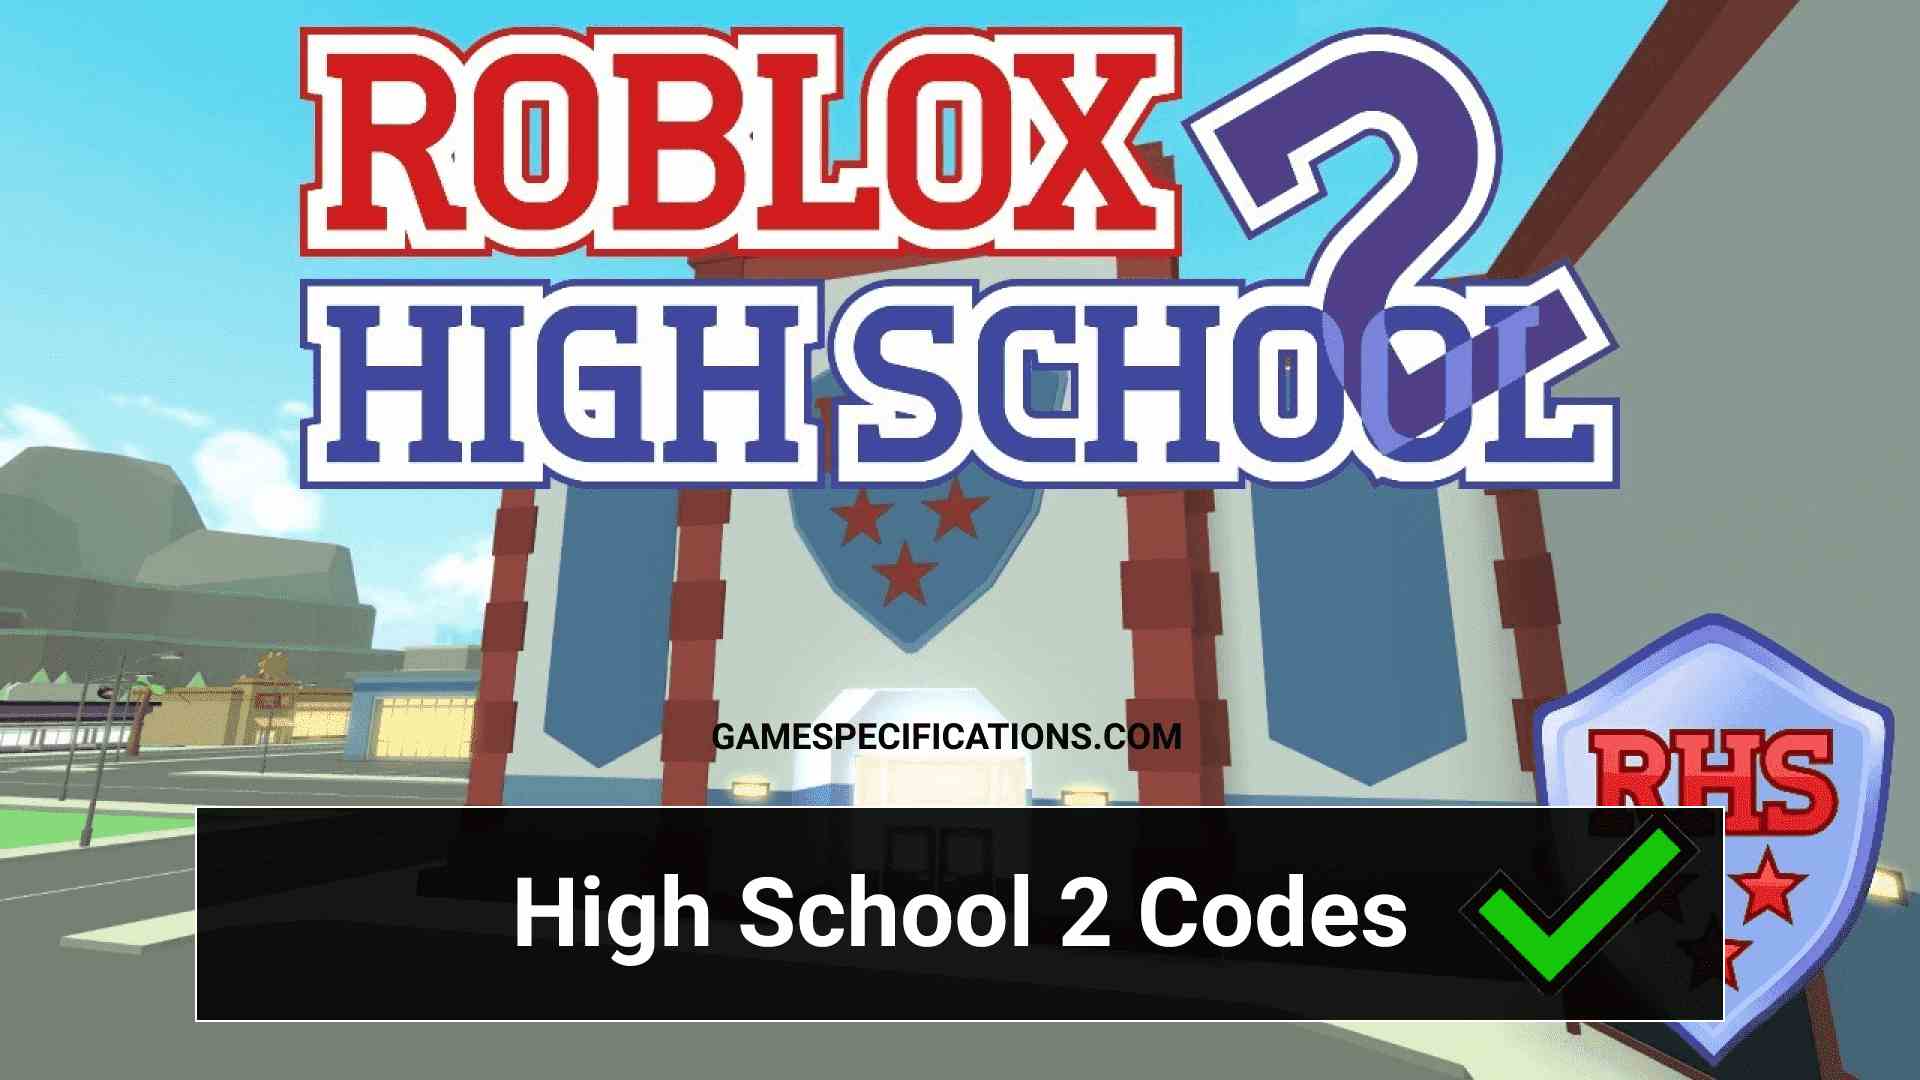 17 Working Roblox High School 2 Codes July 2021 Game Specifications - how to drive a car in roblox high school 2